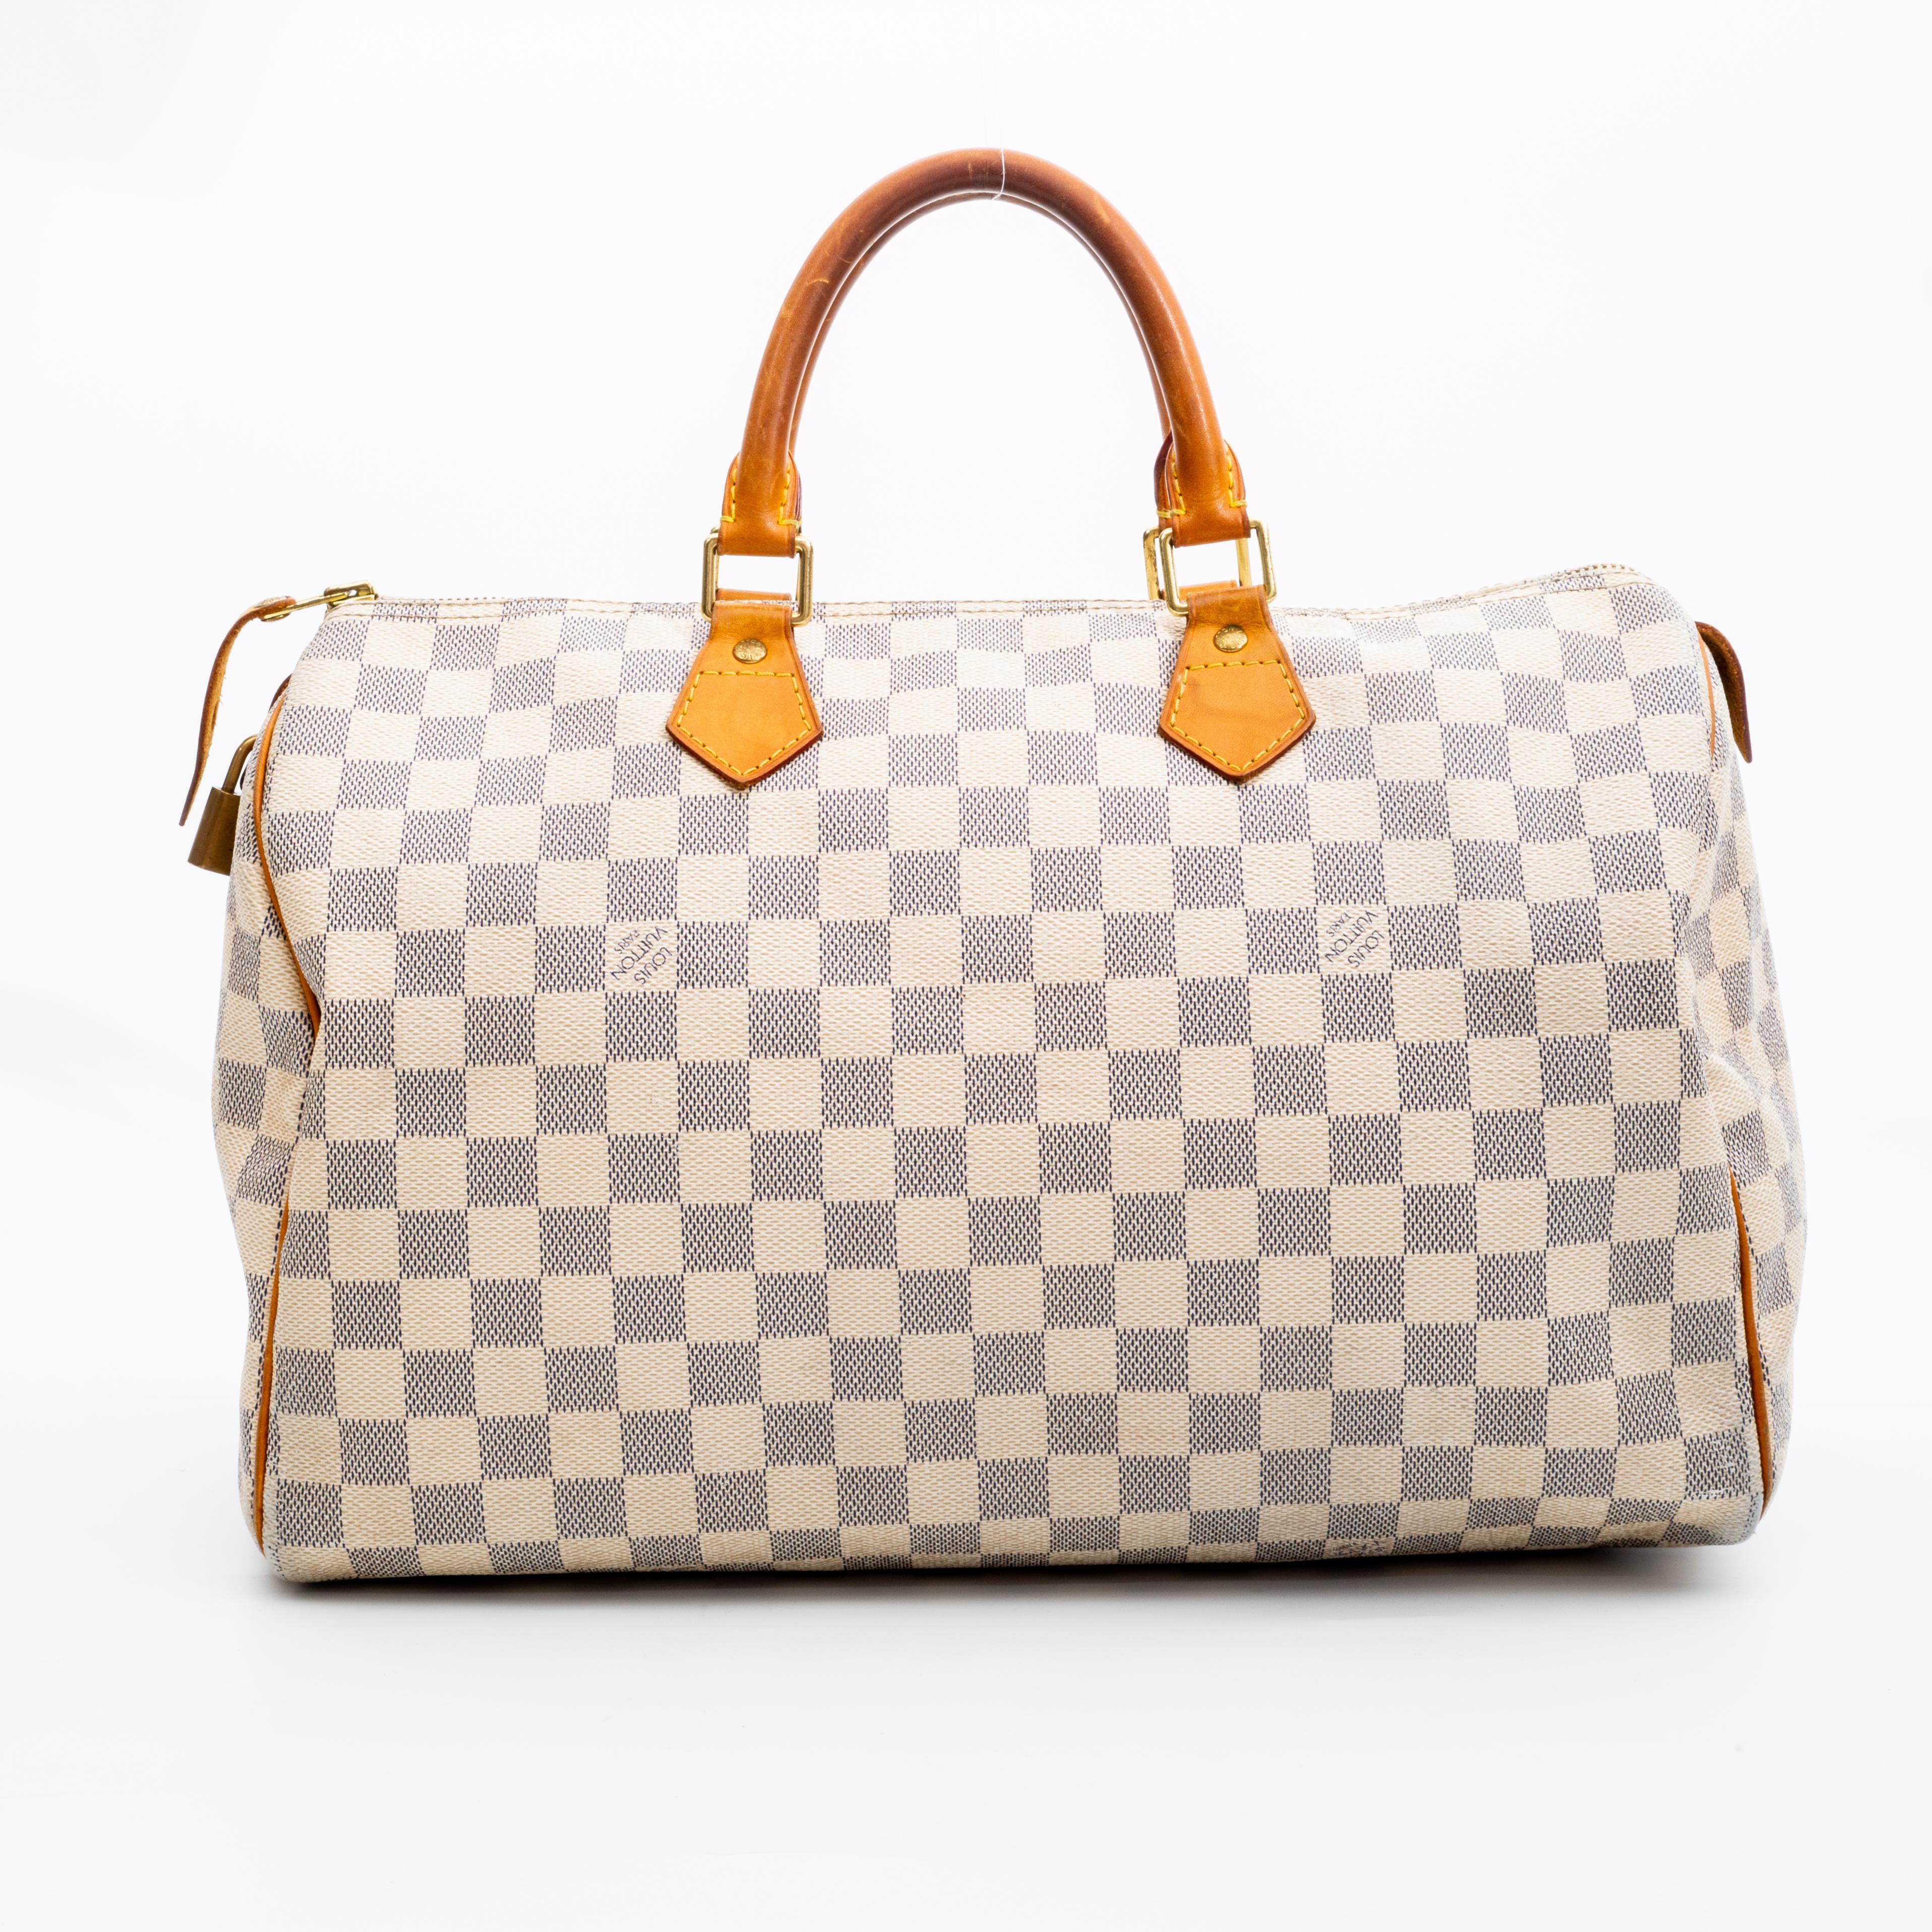 The Speedy bags was made popular by Audrey Hepburn and this model measures 35 cm long. 
The bag is made out of Damier Azur coated canvas with tanned natural cowhide leather finishes. This bag features rolled leather handles, brass hardware, top zip